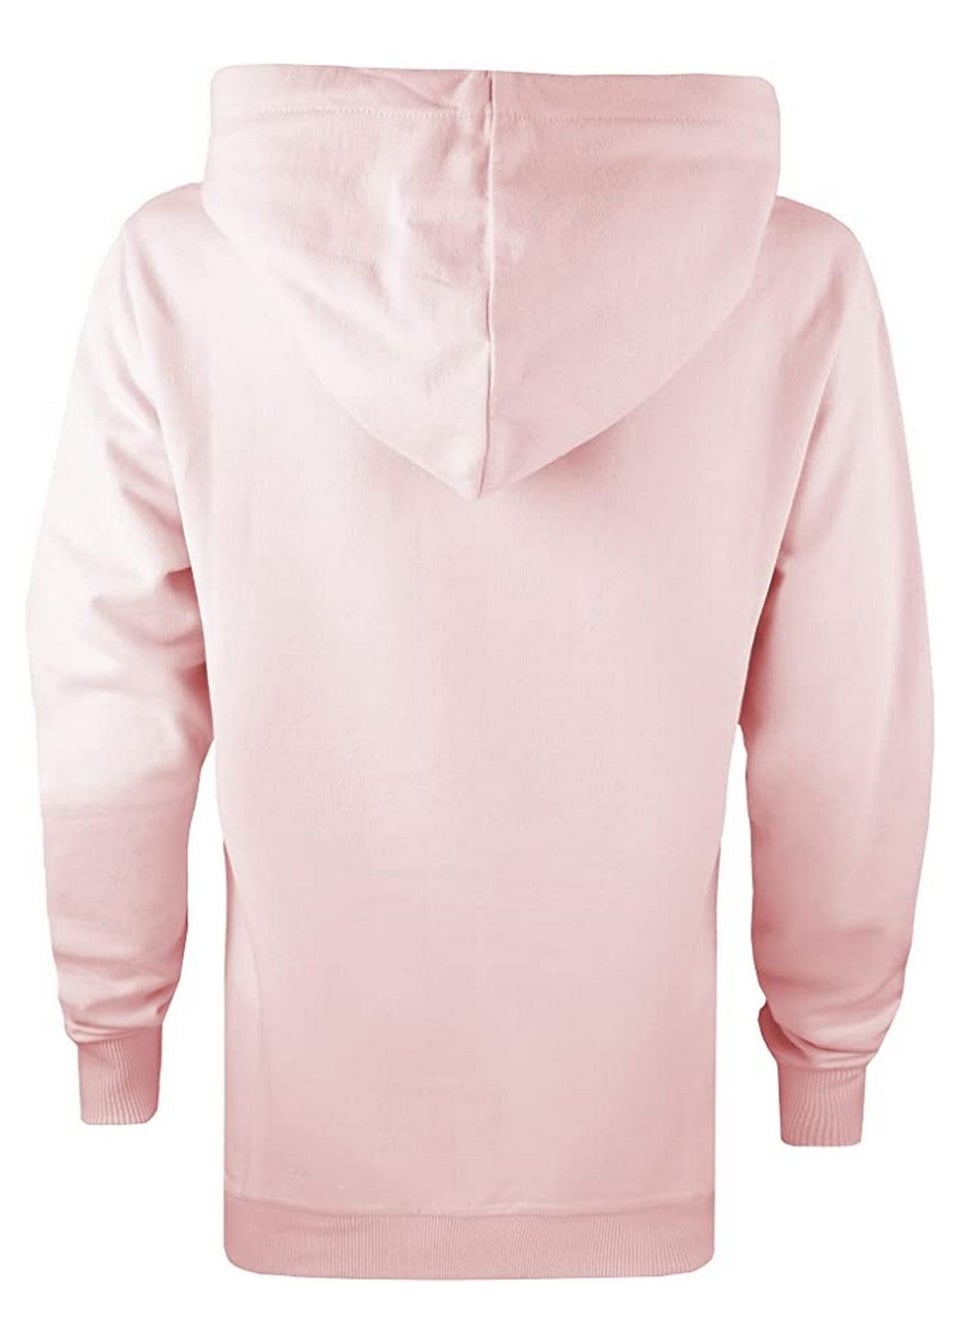 Disney Pale Pink Open Arms Mickey Mouse Hoodie